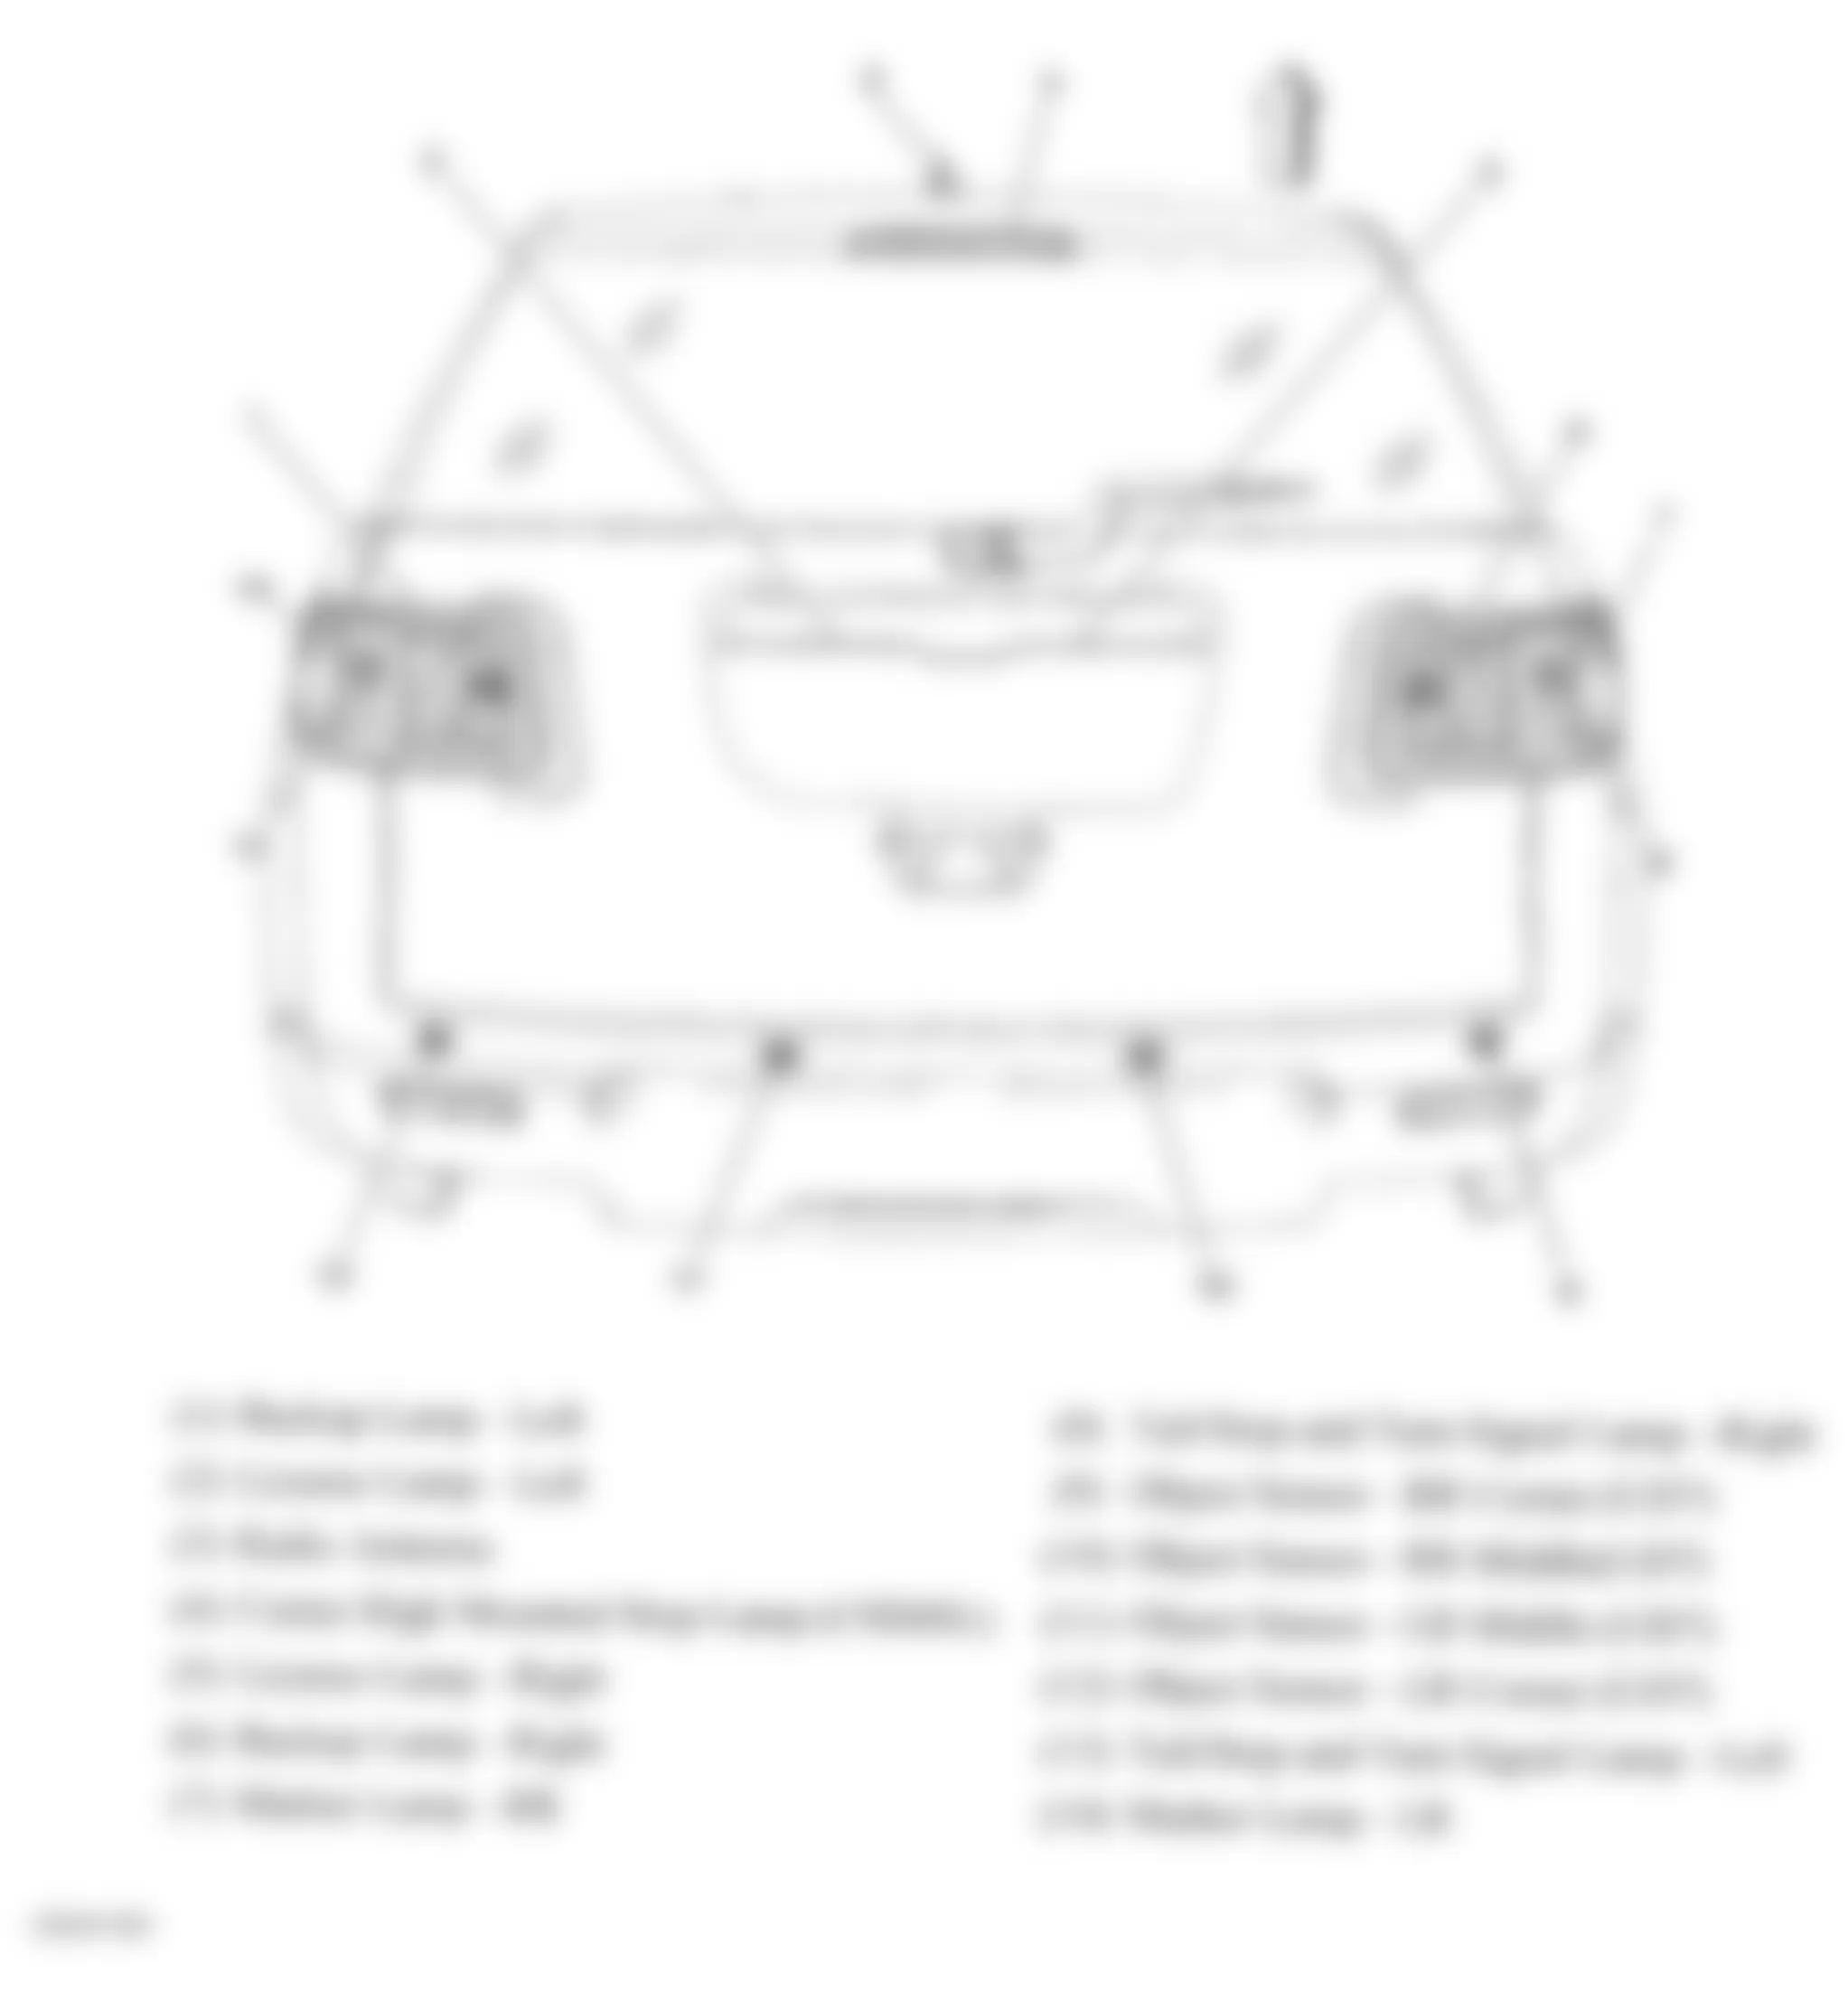 GMC Acadia SL 2010 - Component Locations -  Rear Of Vehicle (Acadia & Outlook)